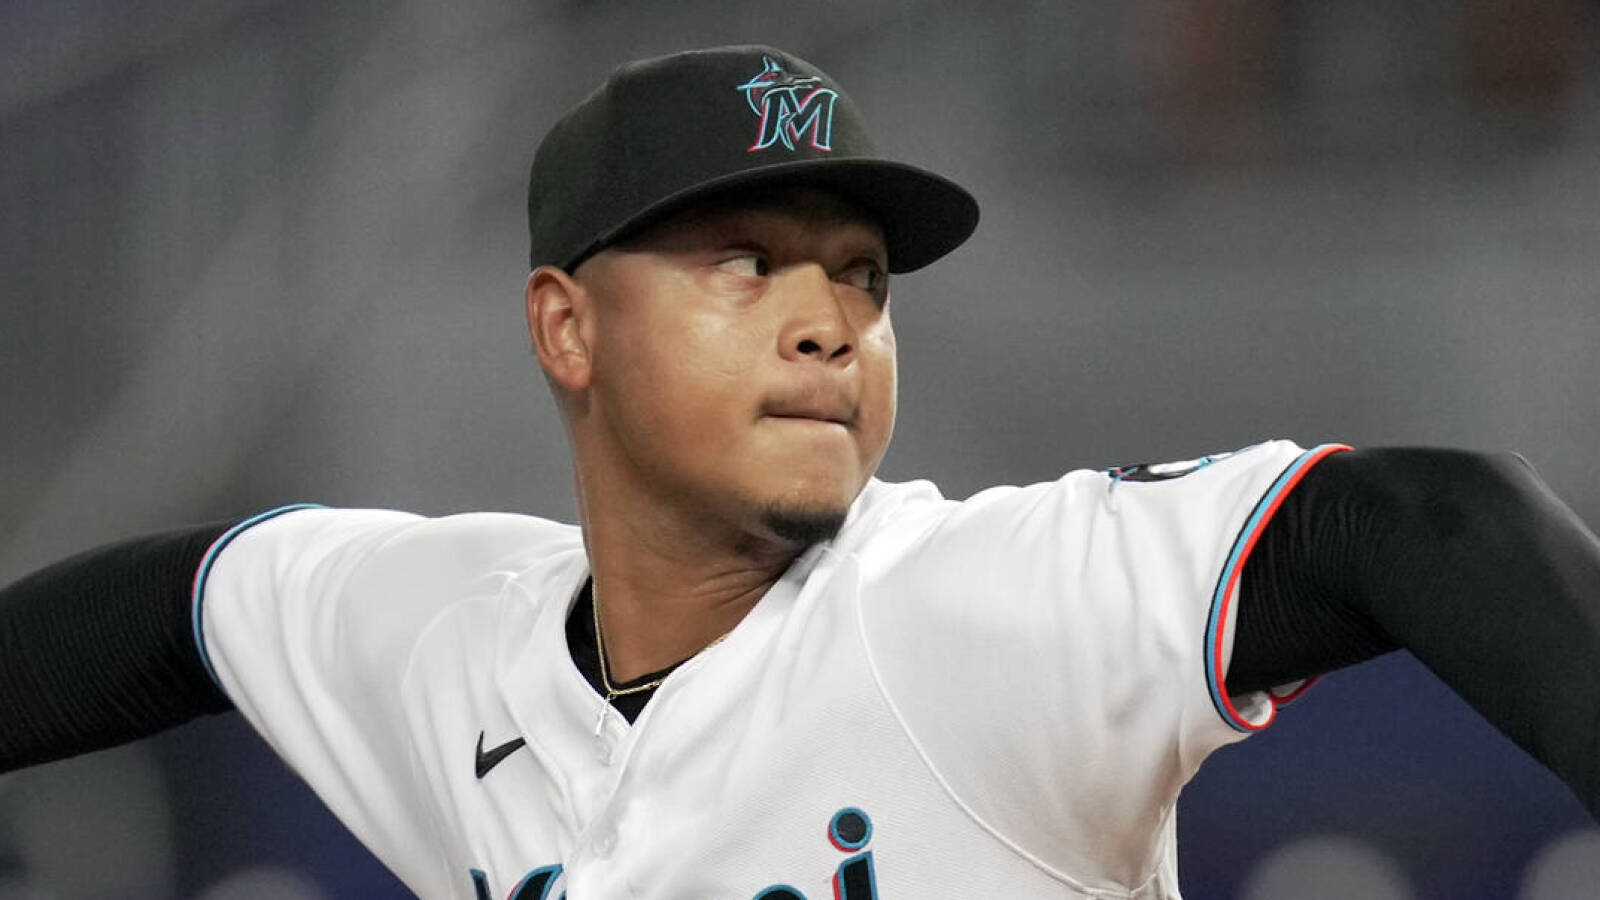 Mets add much-needed pitching depth in trade with Marlins